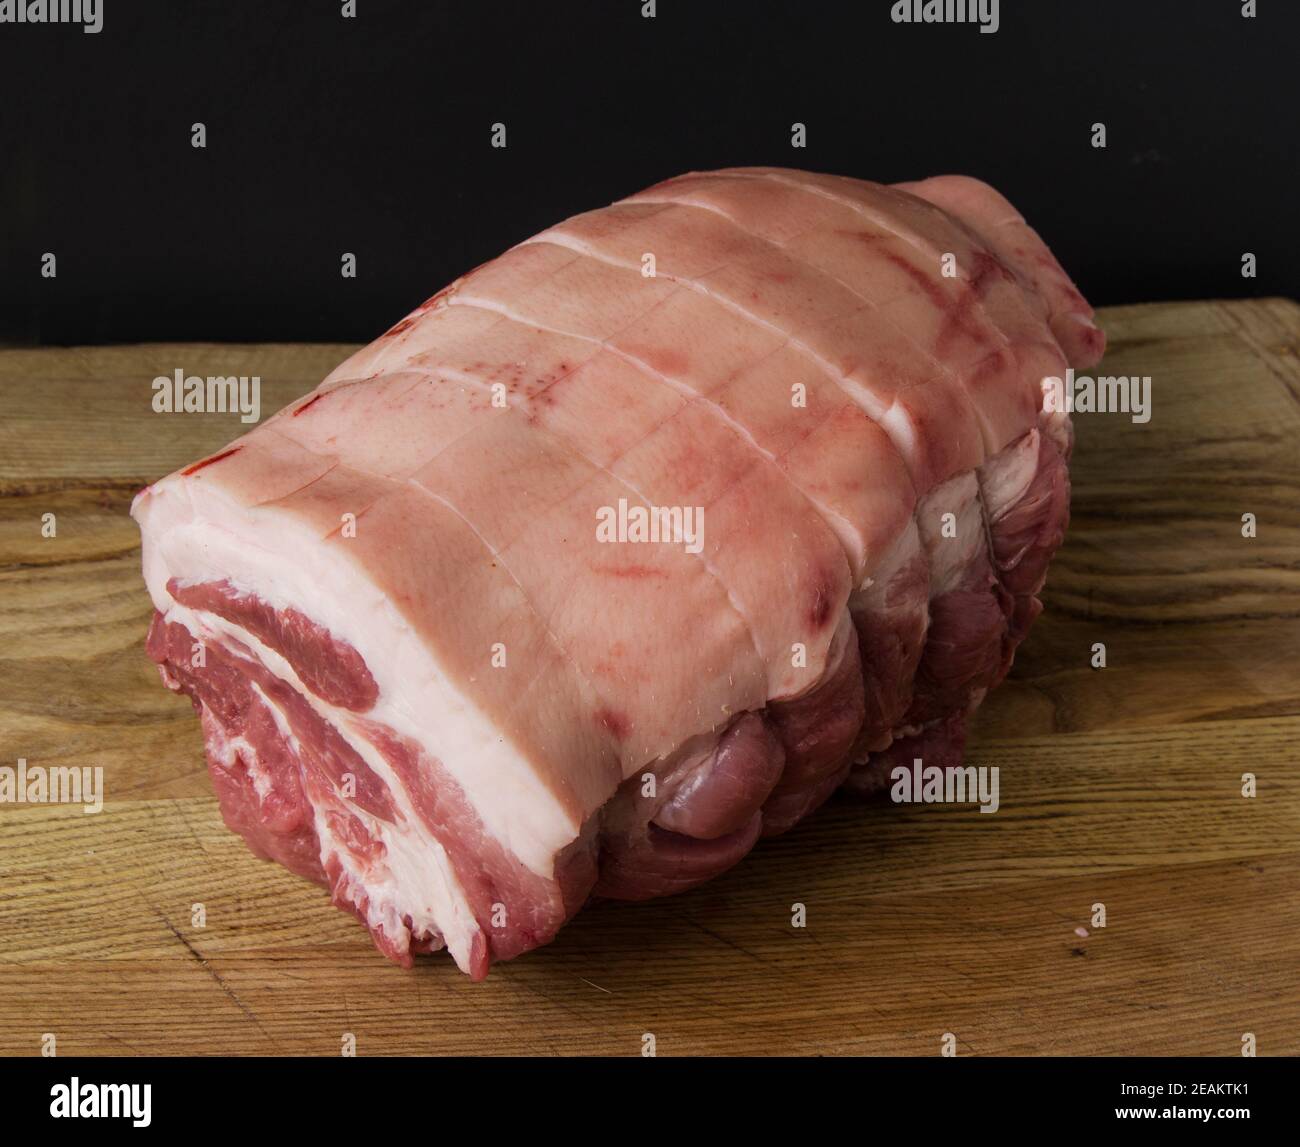 raw pork joint photographed on a wooden cutting board with a black background Stock Photo